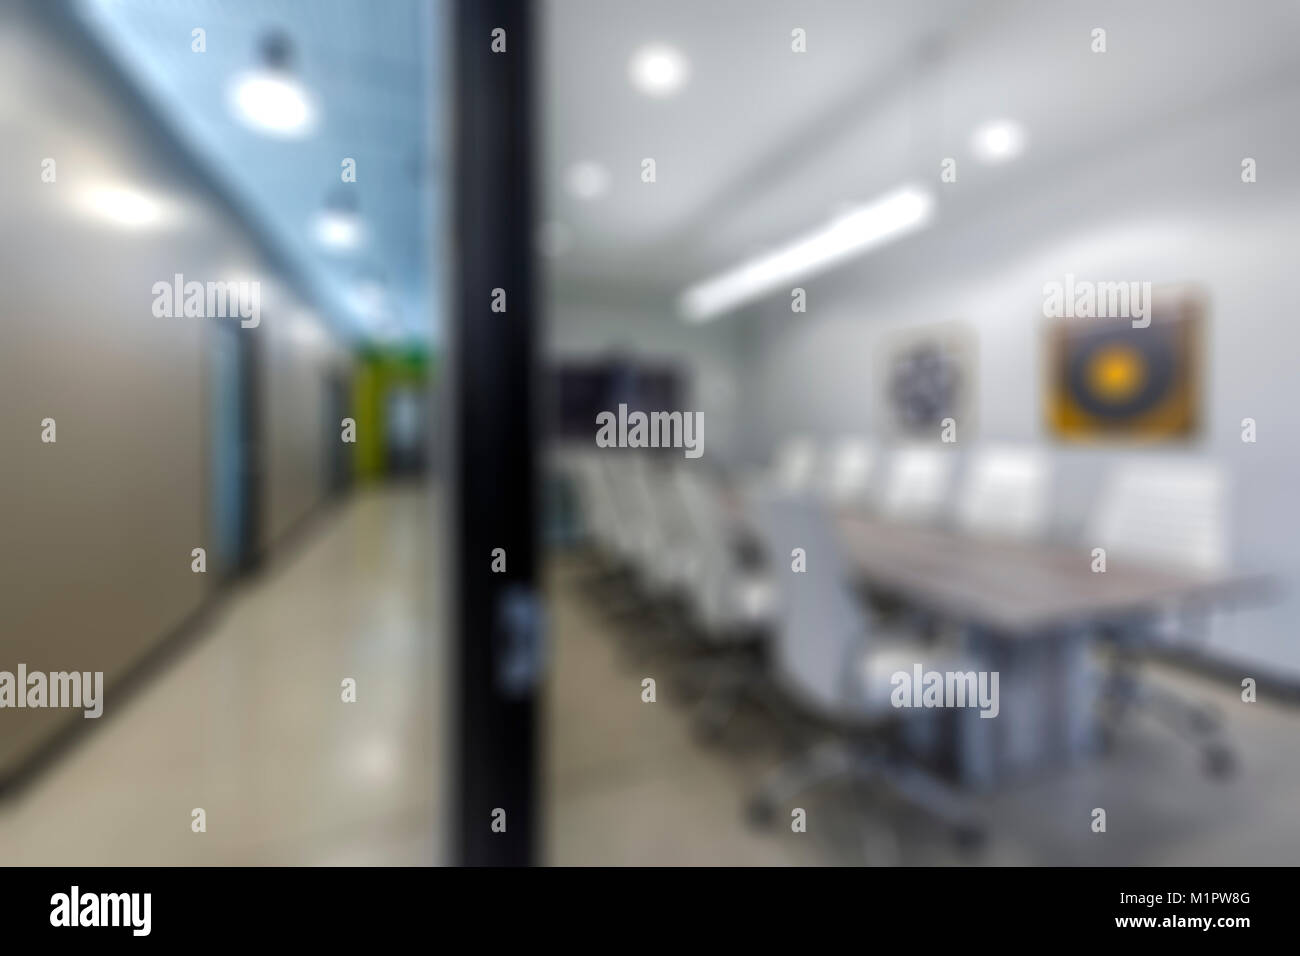 Blurred background of conference room interior Stock Photo